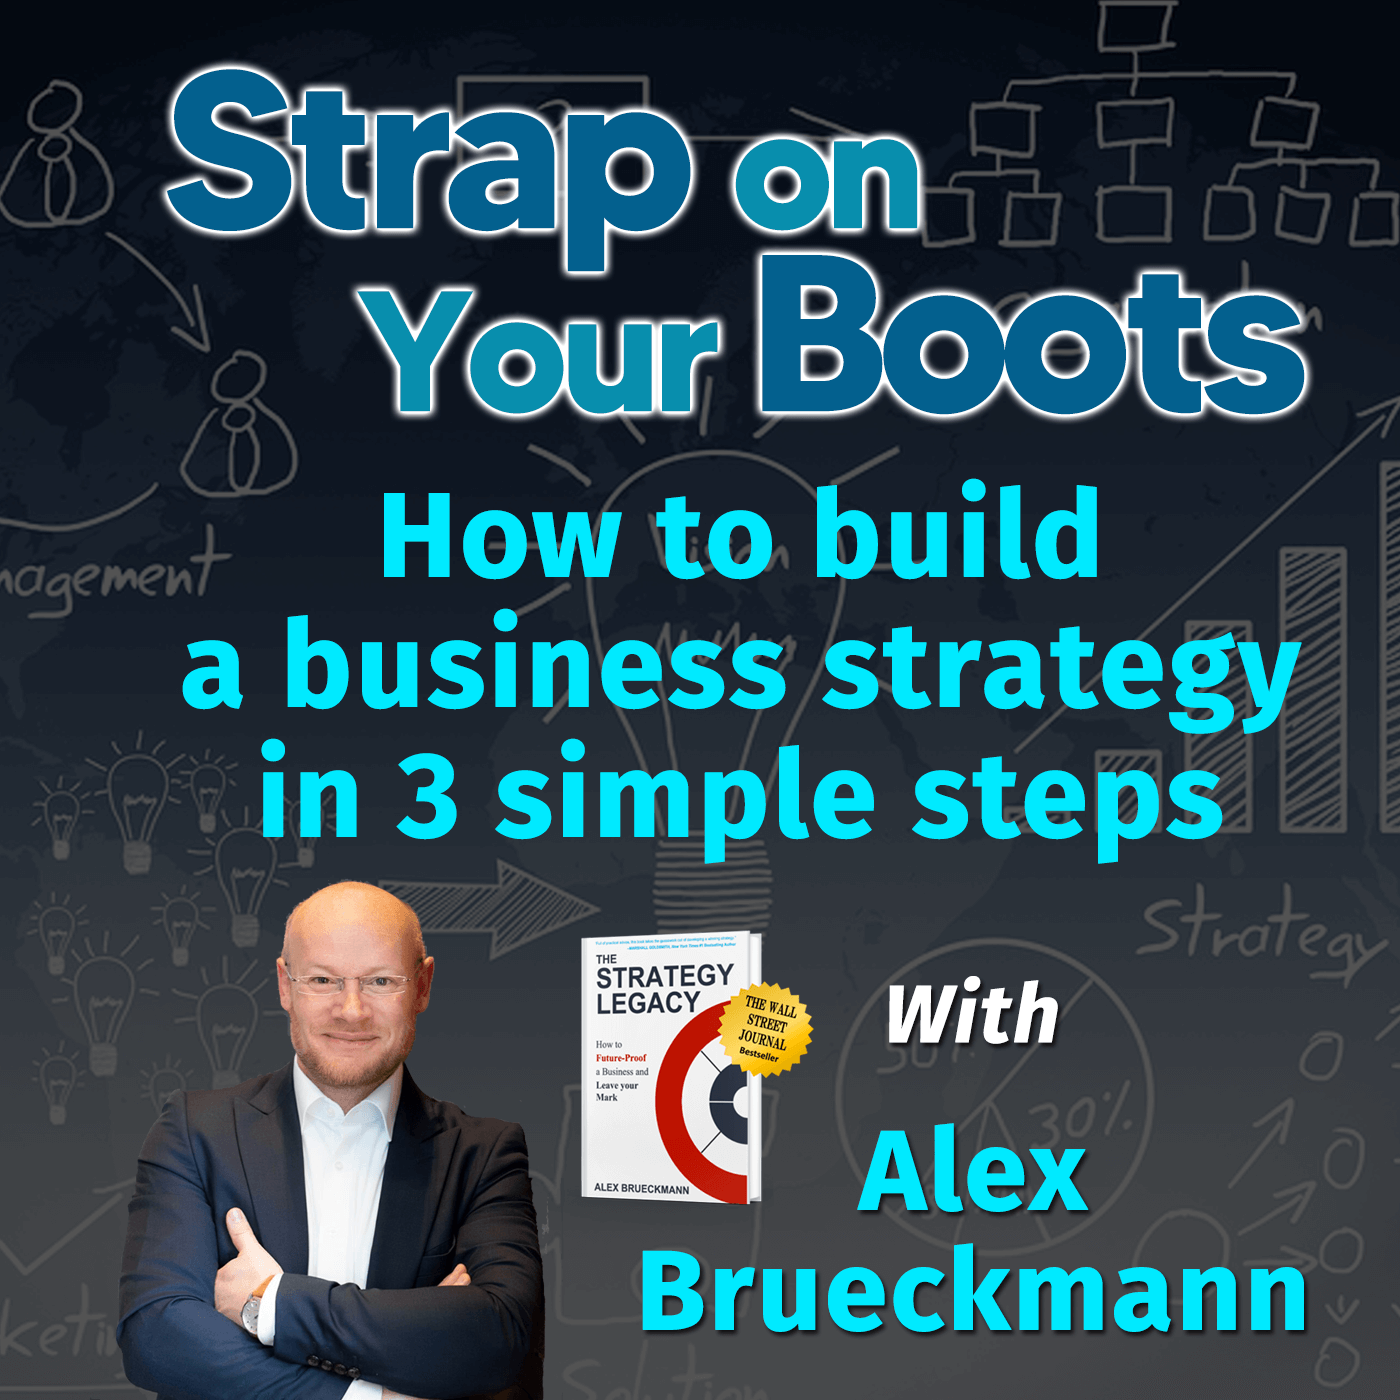 How to build a business strategy in 3 simple steps with Alex Brueckmann